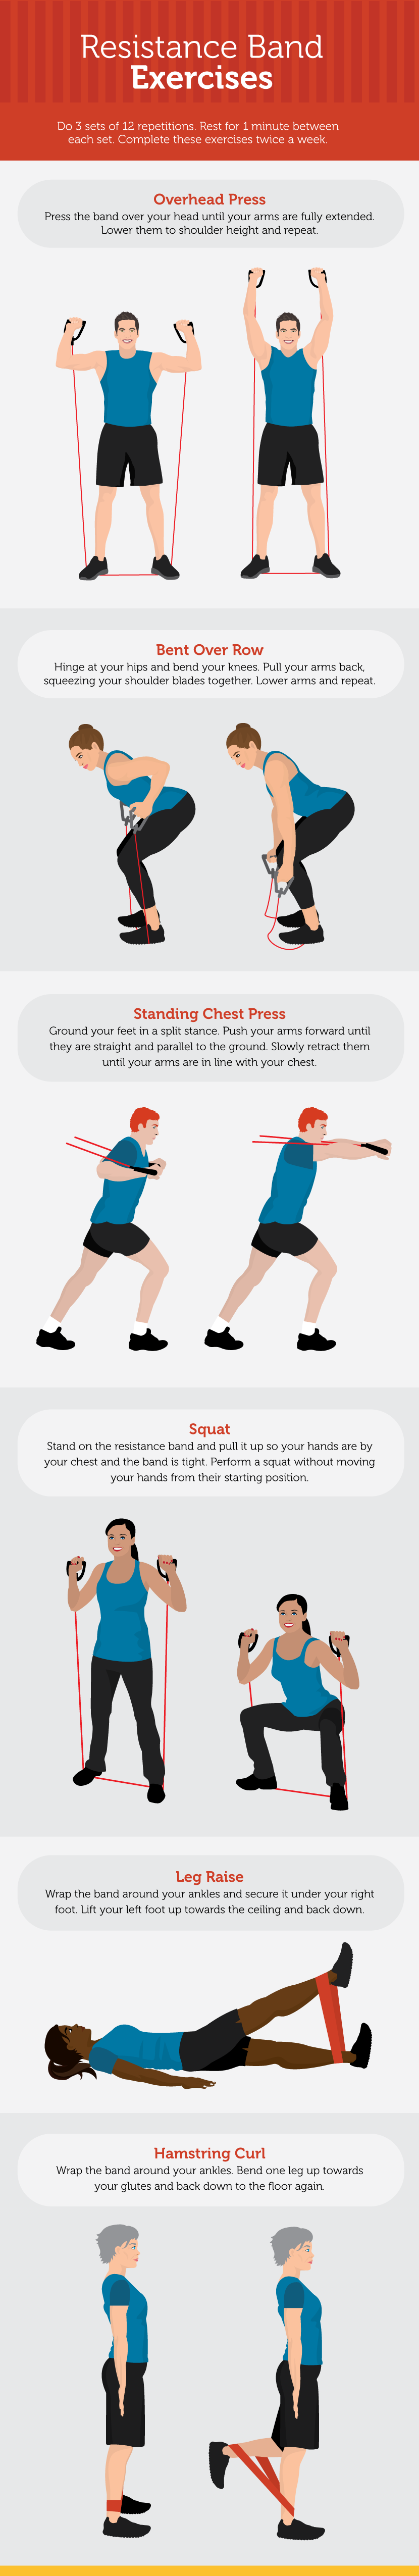 How Effective Are Resistance Bands Workouts?